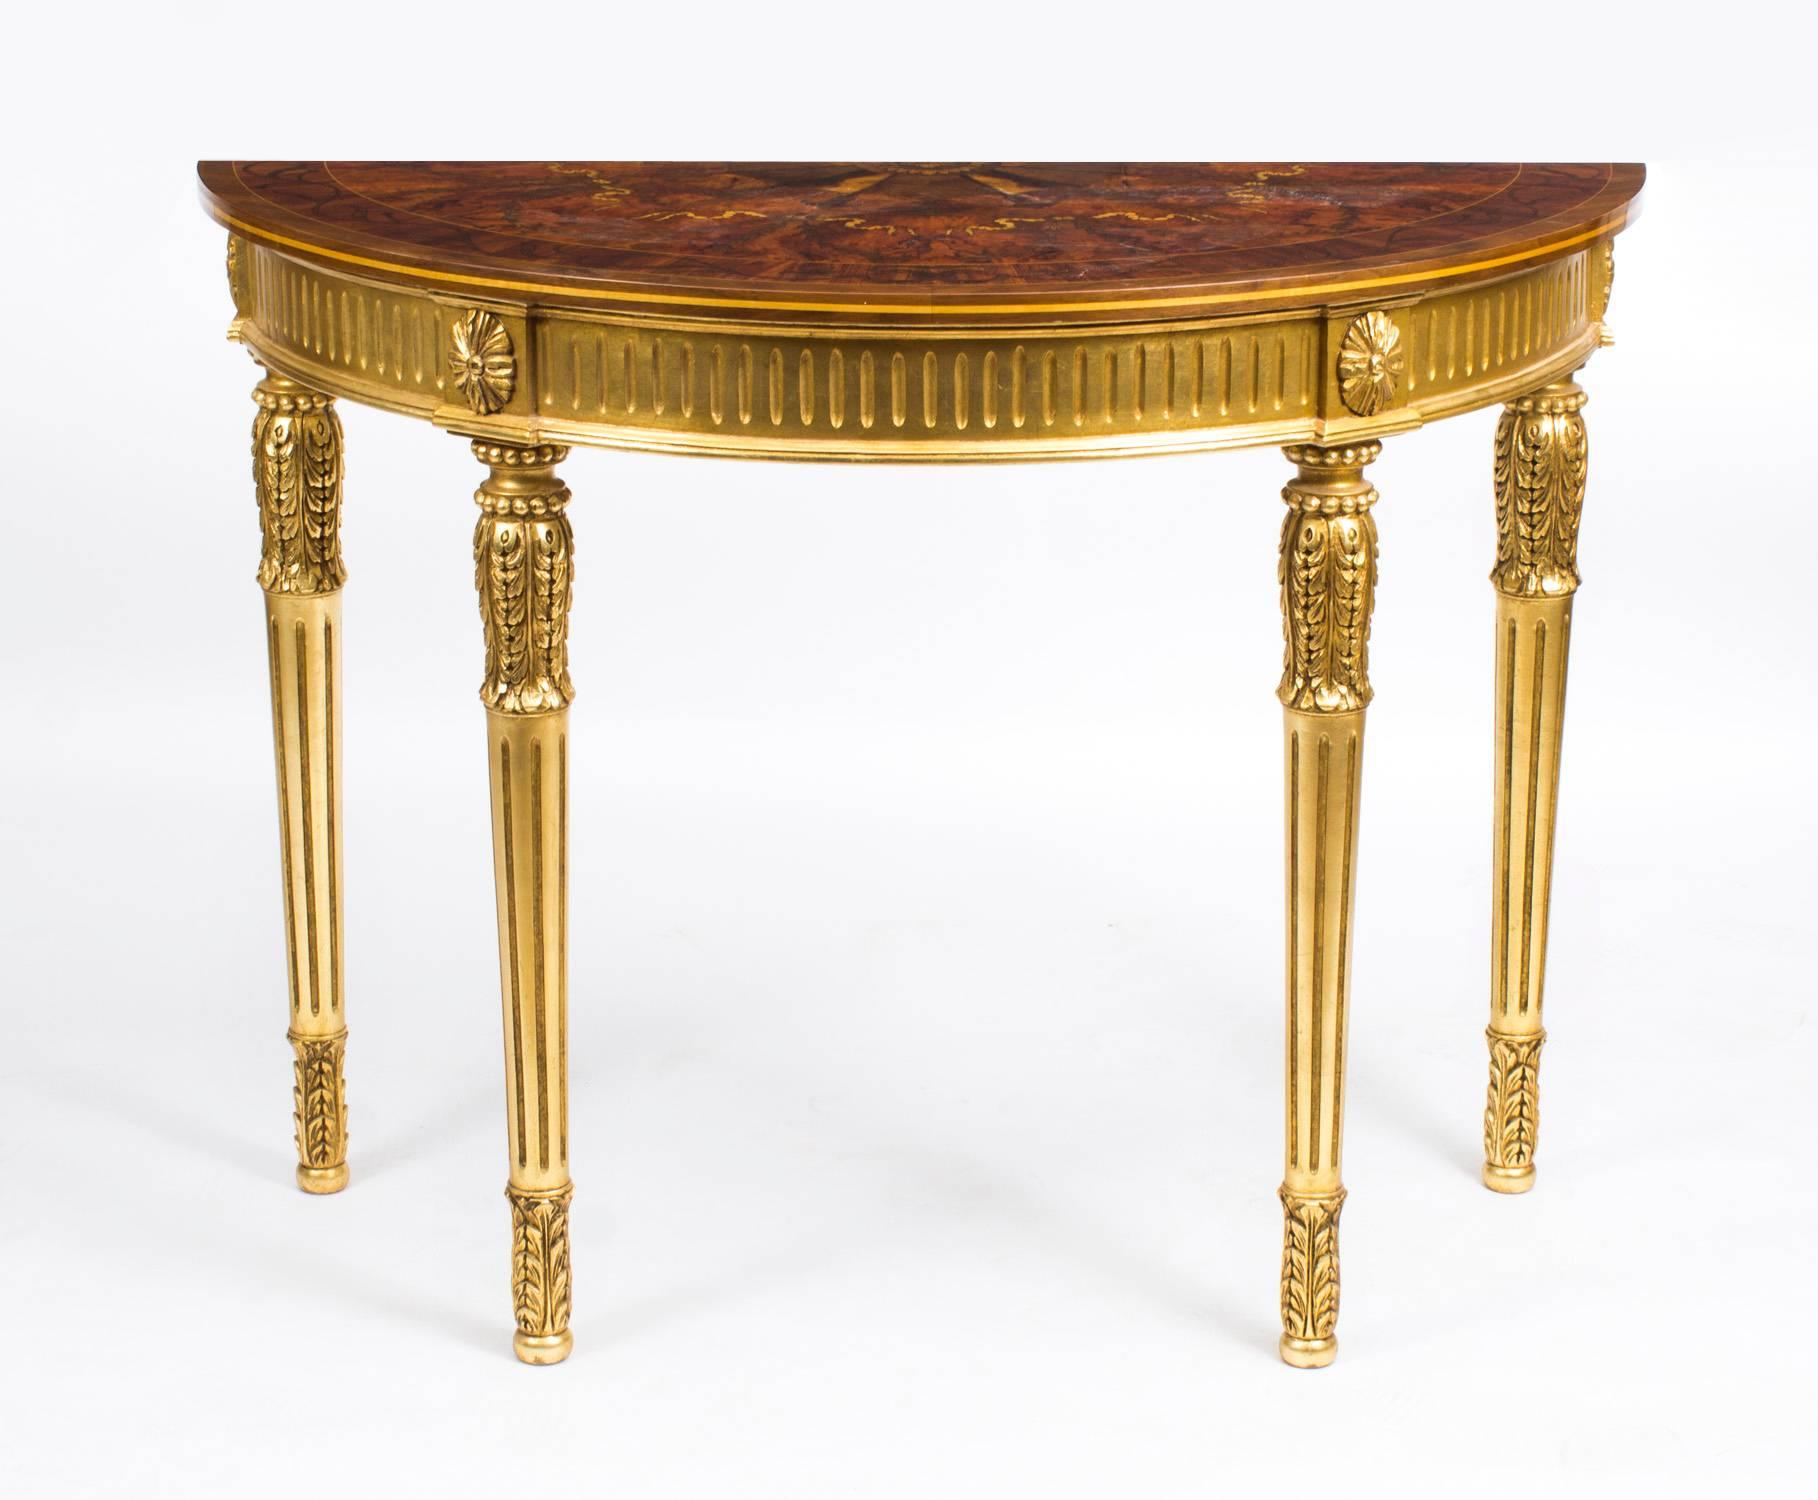 This is an exquisite pair of Sheraton style giltwood half moon console tables with elaborate marquetry inlaid decoration dating from the late 20th century. 

Sheraton is a style of English furniture that originated around 1800. This style is